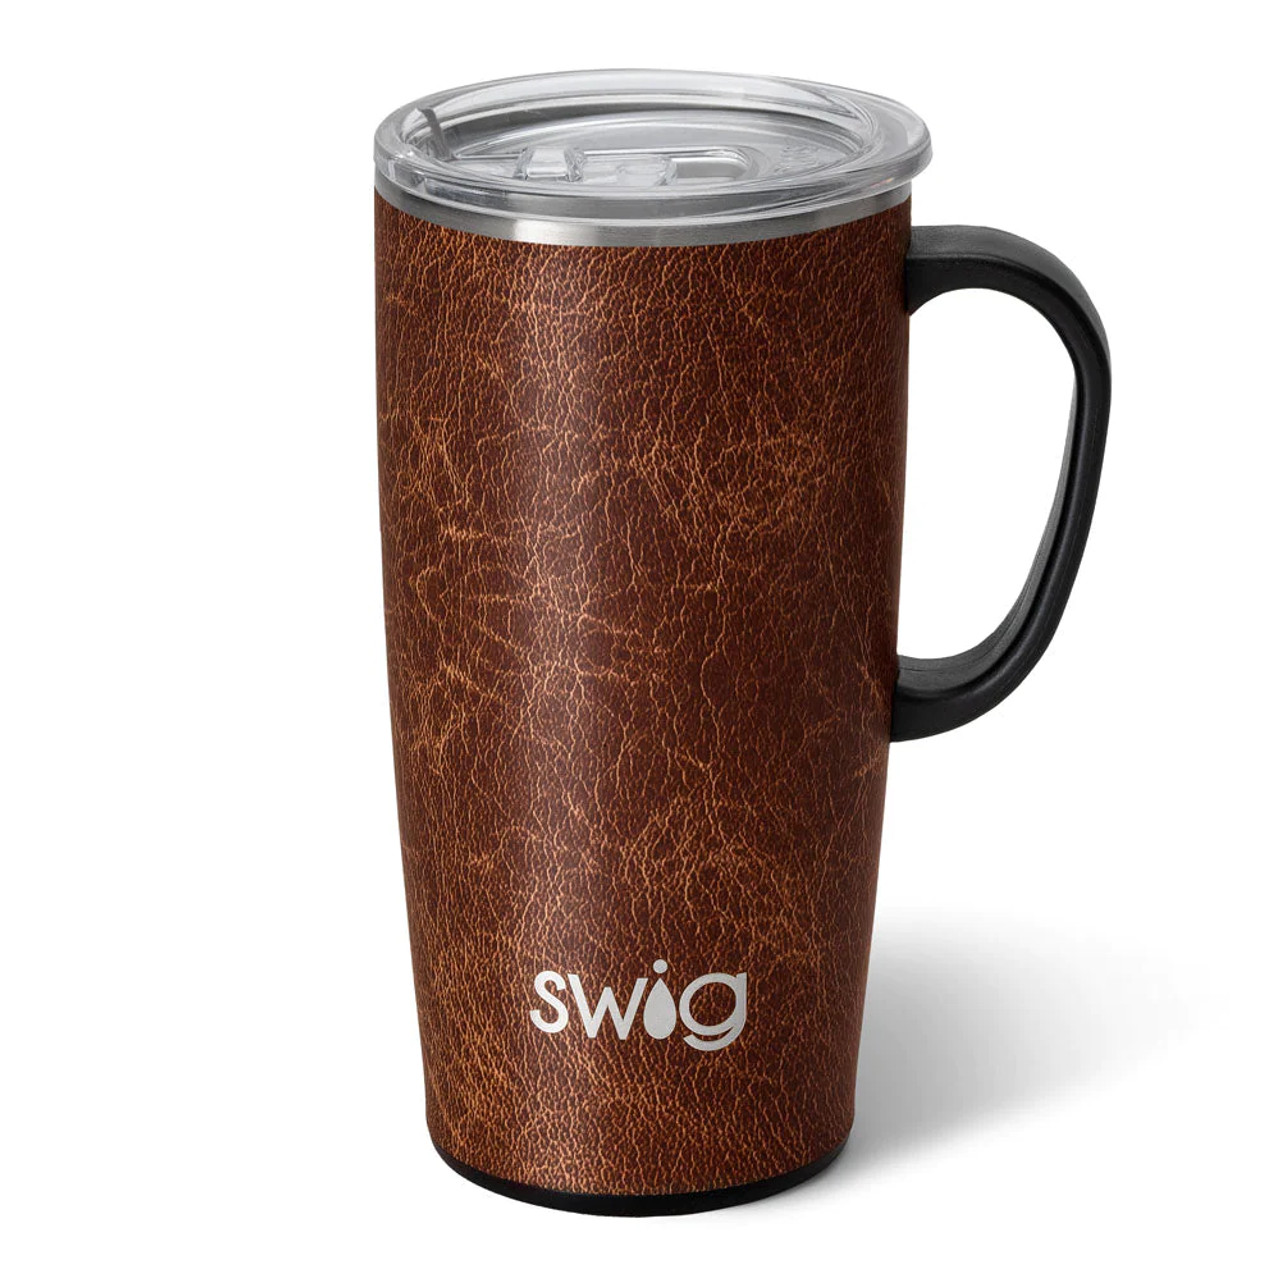 https://cdn11.bigcommerce.com/s-d4i7gnheo/images/stencil/1280x1280/products/16951/26307/swig-life-signature-22oz-insulated-stainless-steel-travel-mug-with-handle-leather-main__74658.1690554650.jpg?c=2